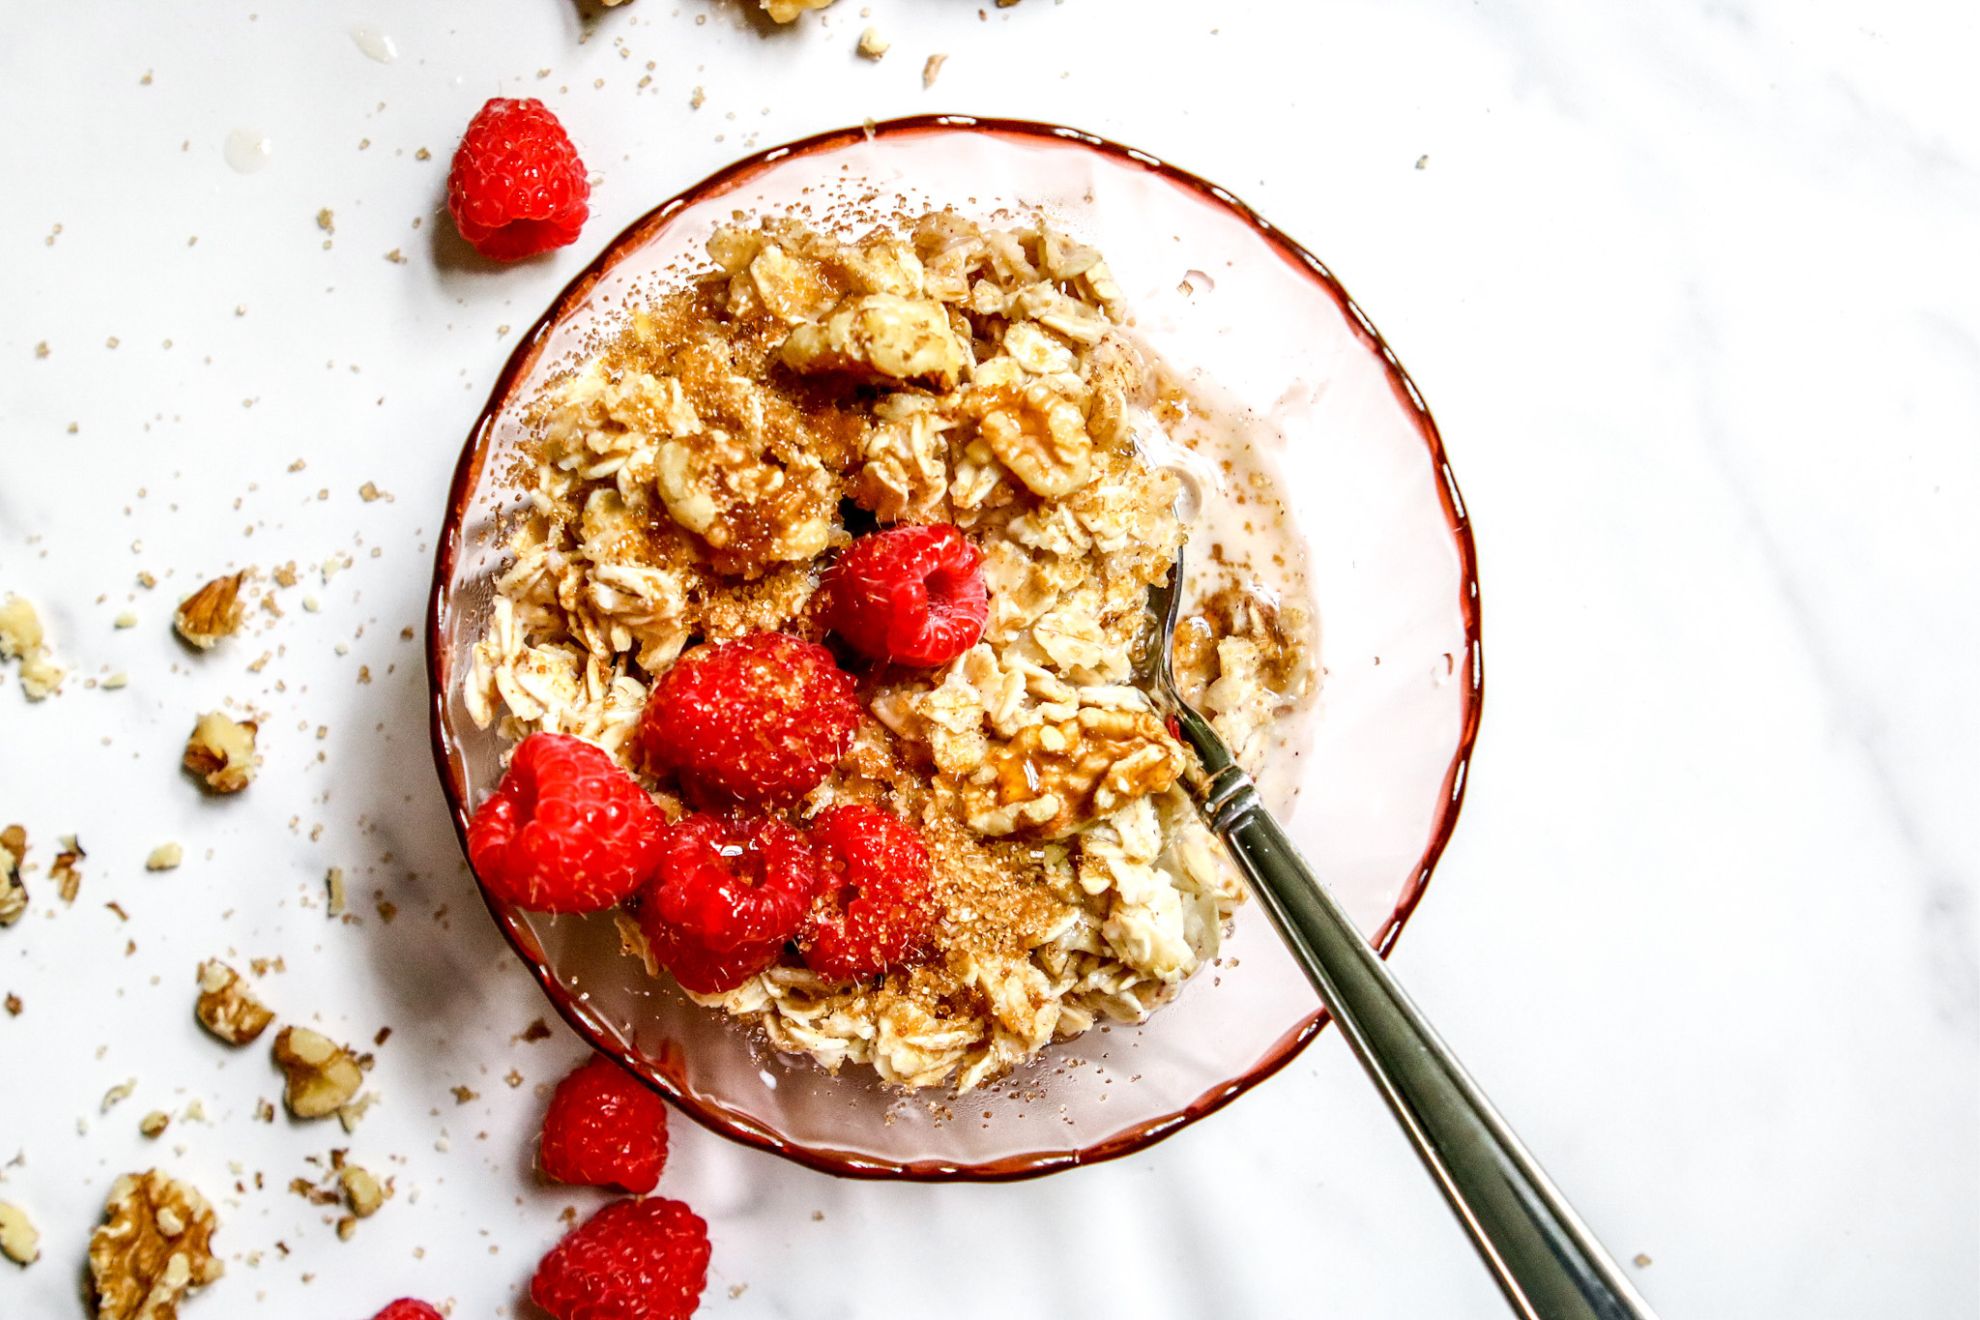 This is an overhead horizontal image of a pink glass bowl with oatmeal in it. A silver spoon is dipping into the oatmeal and leaning against the side of the bowl with the handle pointing to the right bottom corner of the image. The oatmeal is topped with fresh raspberries, walnuts and a sprinkle of brown sugar. The bowl sits on a white marble surface with walnuts and fresh raspberries scattered around it.